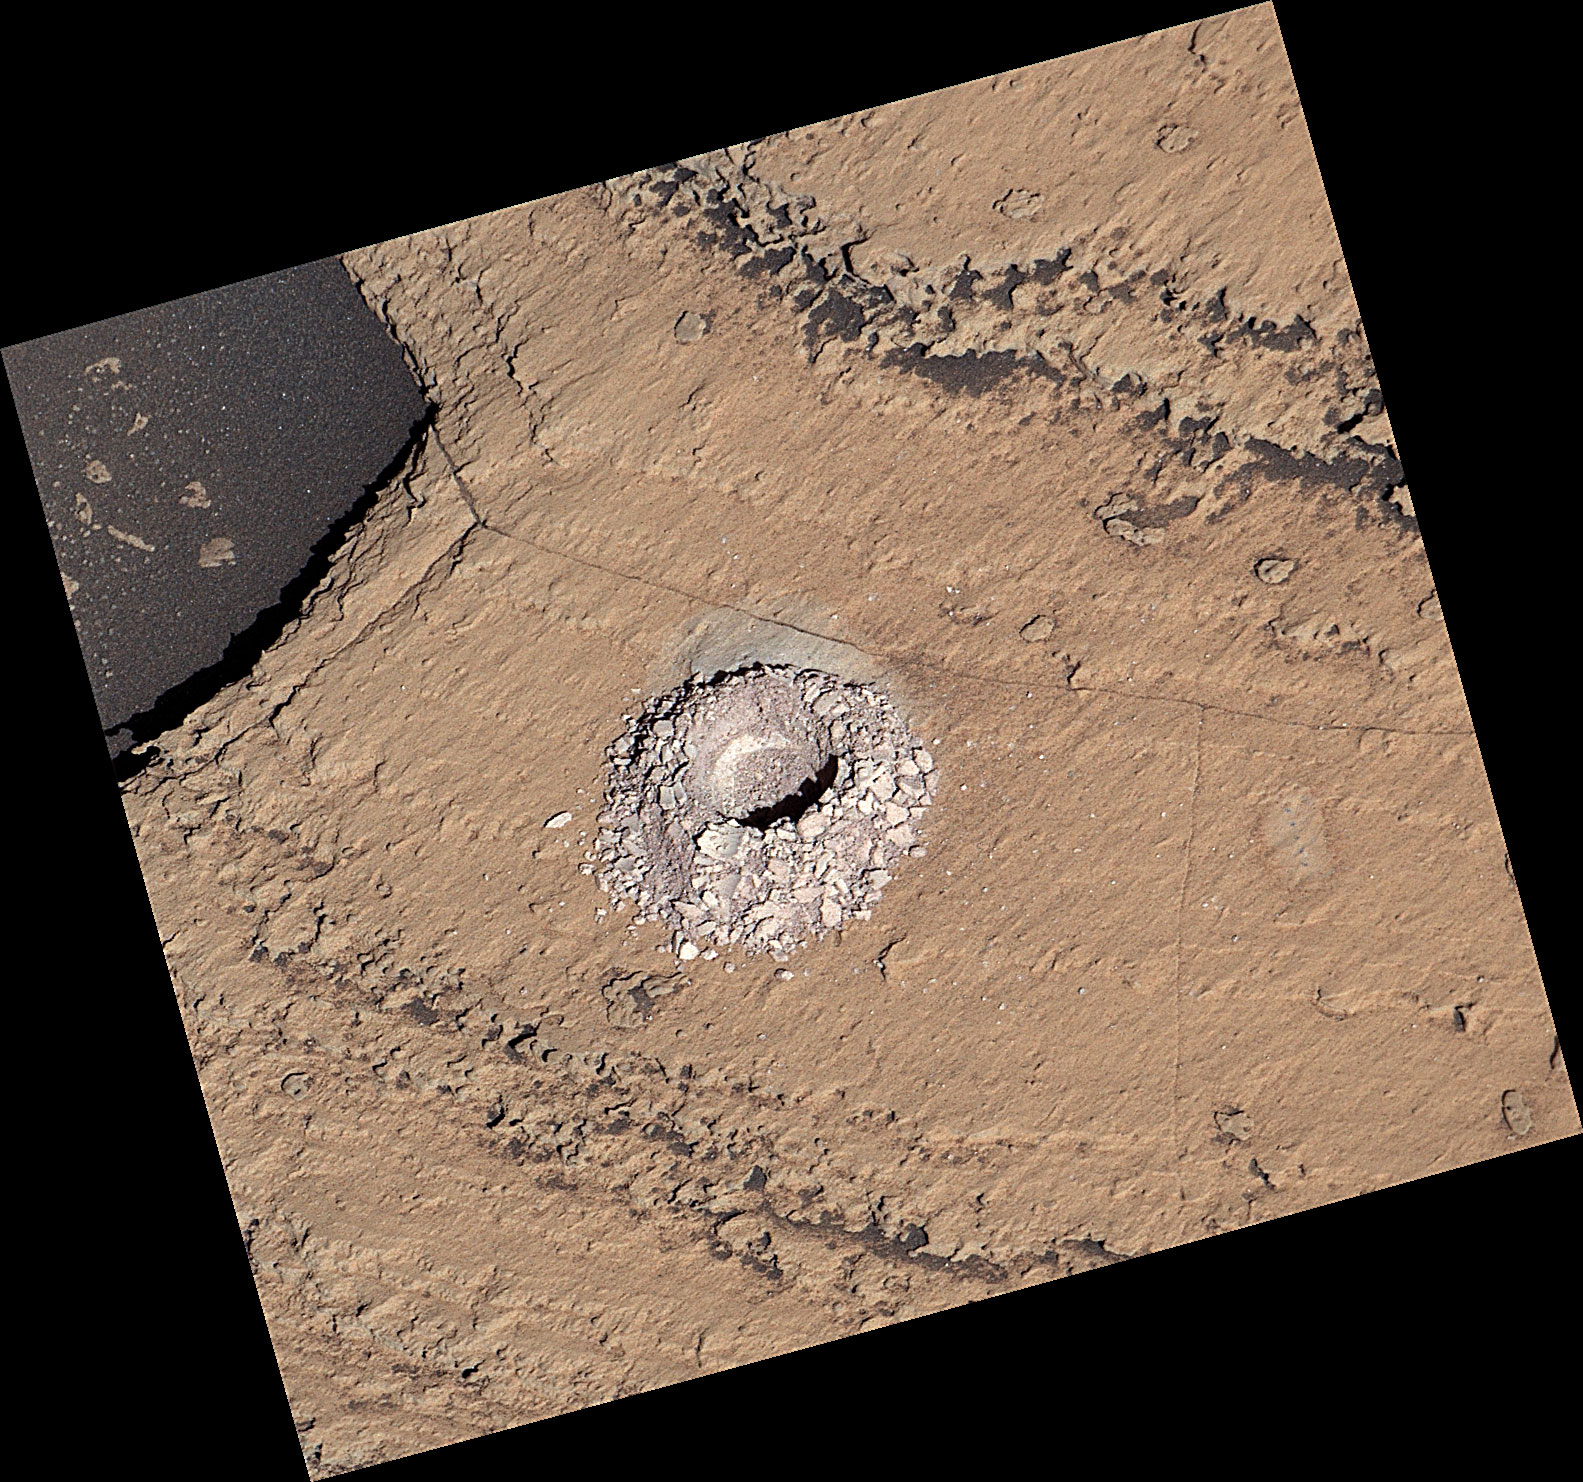 Curiosity Views 'Sequoia' Using Its Mastcam: NASA’s Curiosity Mars rover used the drill on the end of its robotic arm to collect a sample from a rock nicknamed “Sequoia” on Oct. 17, 2023, the 3,980th Martian day, or sol, of the mission. The rover’s Mastcam captured this image.